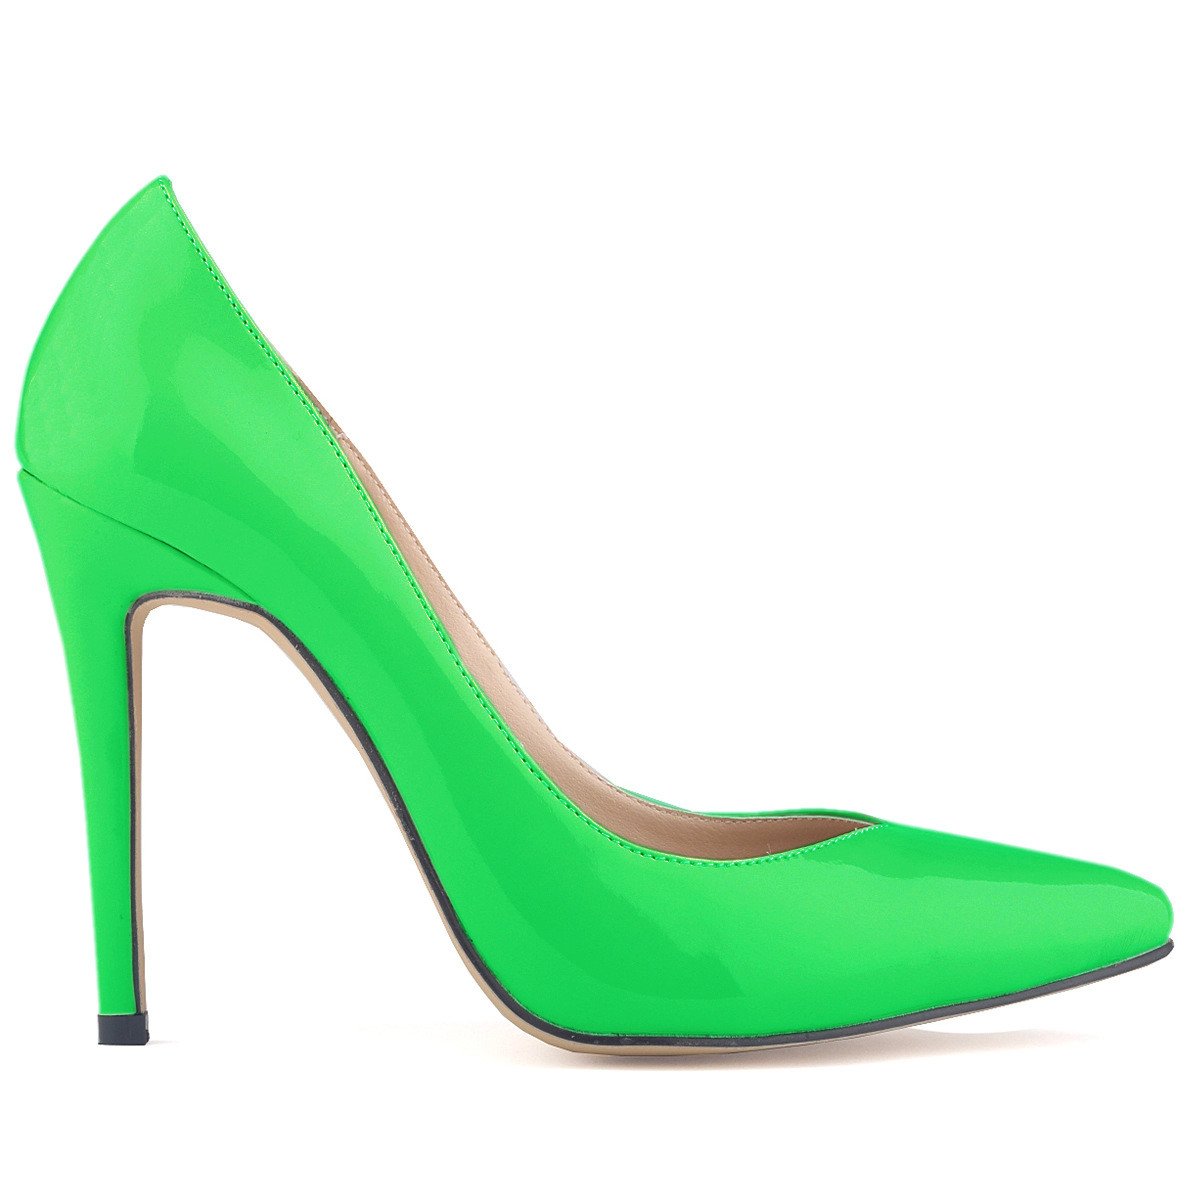 Pointed Classic Candy Colors High Heels Shoes – May Your Fashion